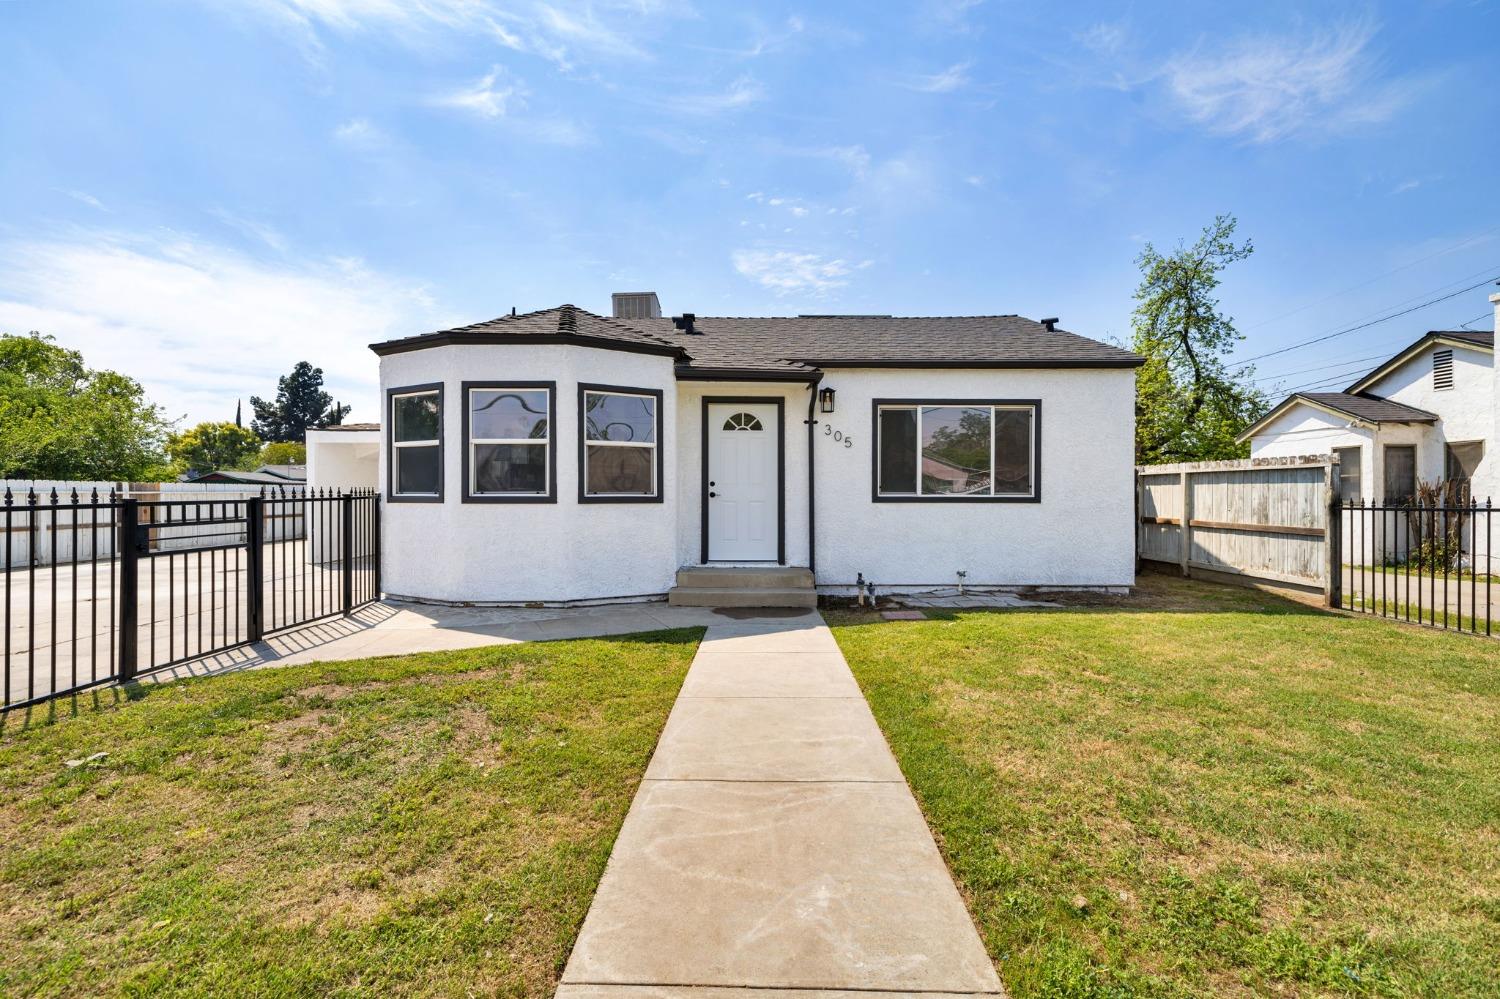 Photo of 305 N Maple Ave in Fresno, CA